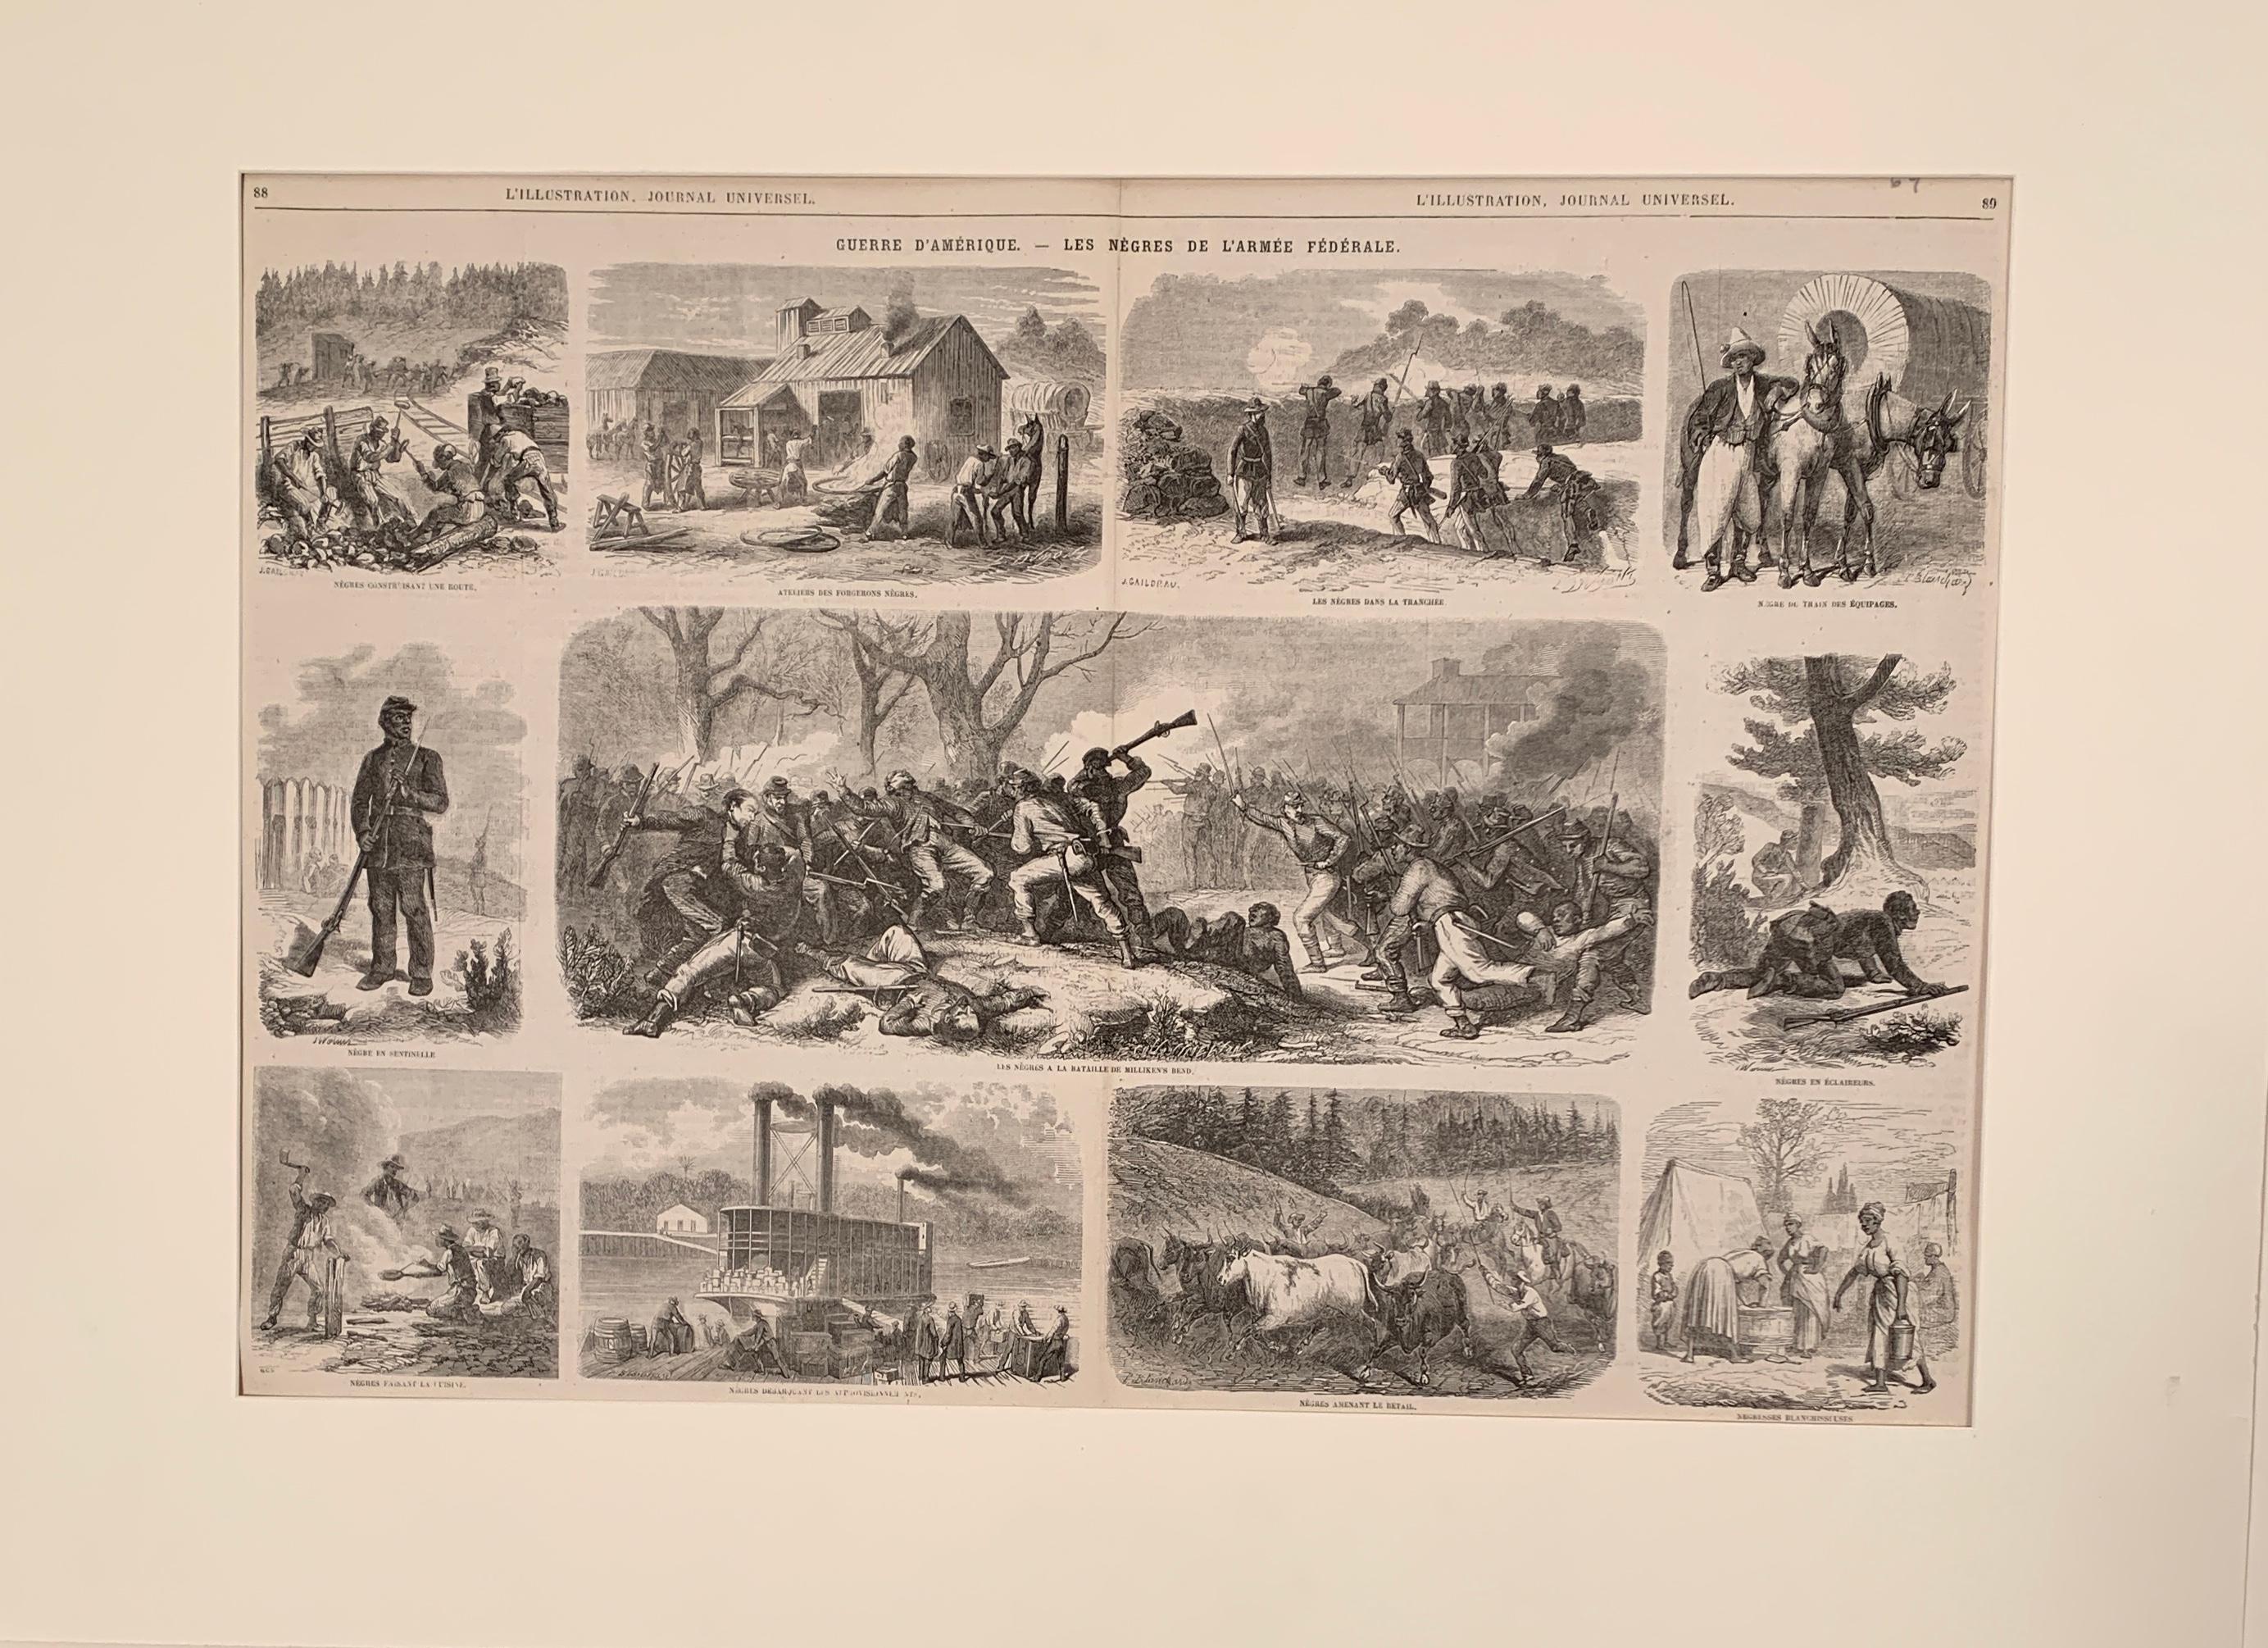 Unknown Figurative Print -  Afro-American Men and Women in the Federal Army during American Civil War